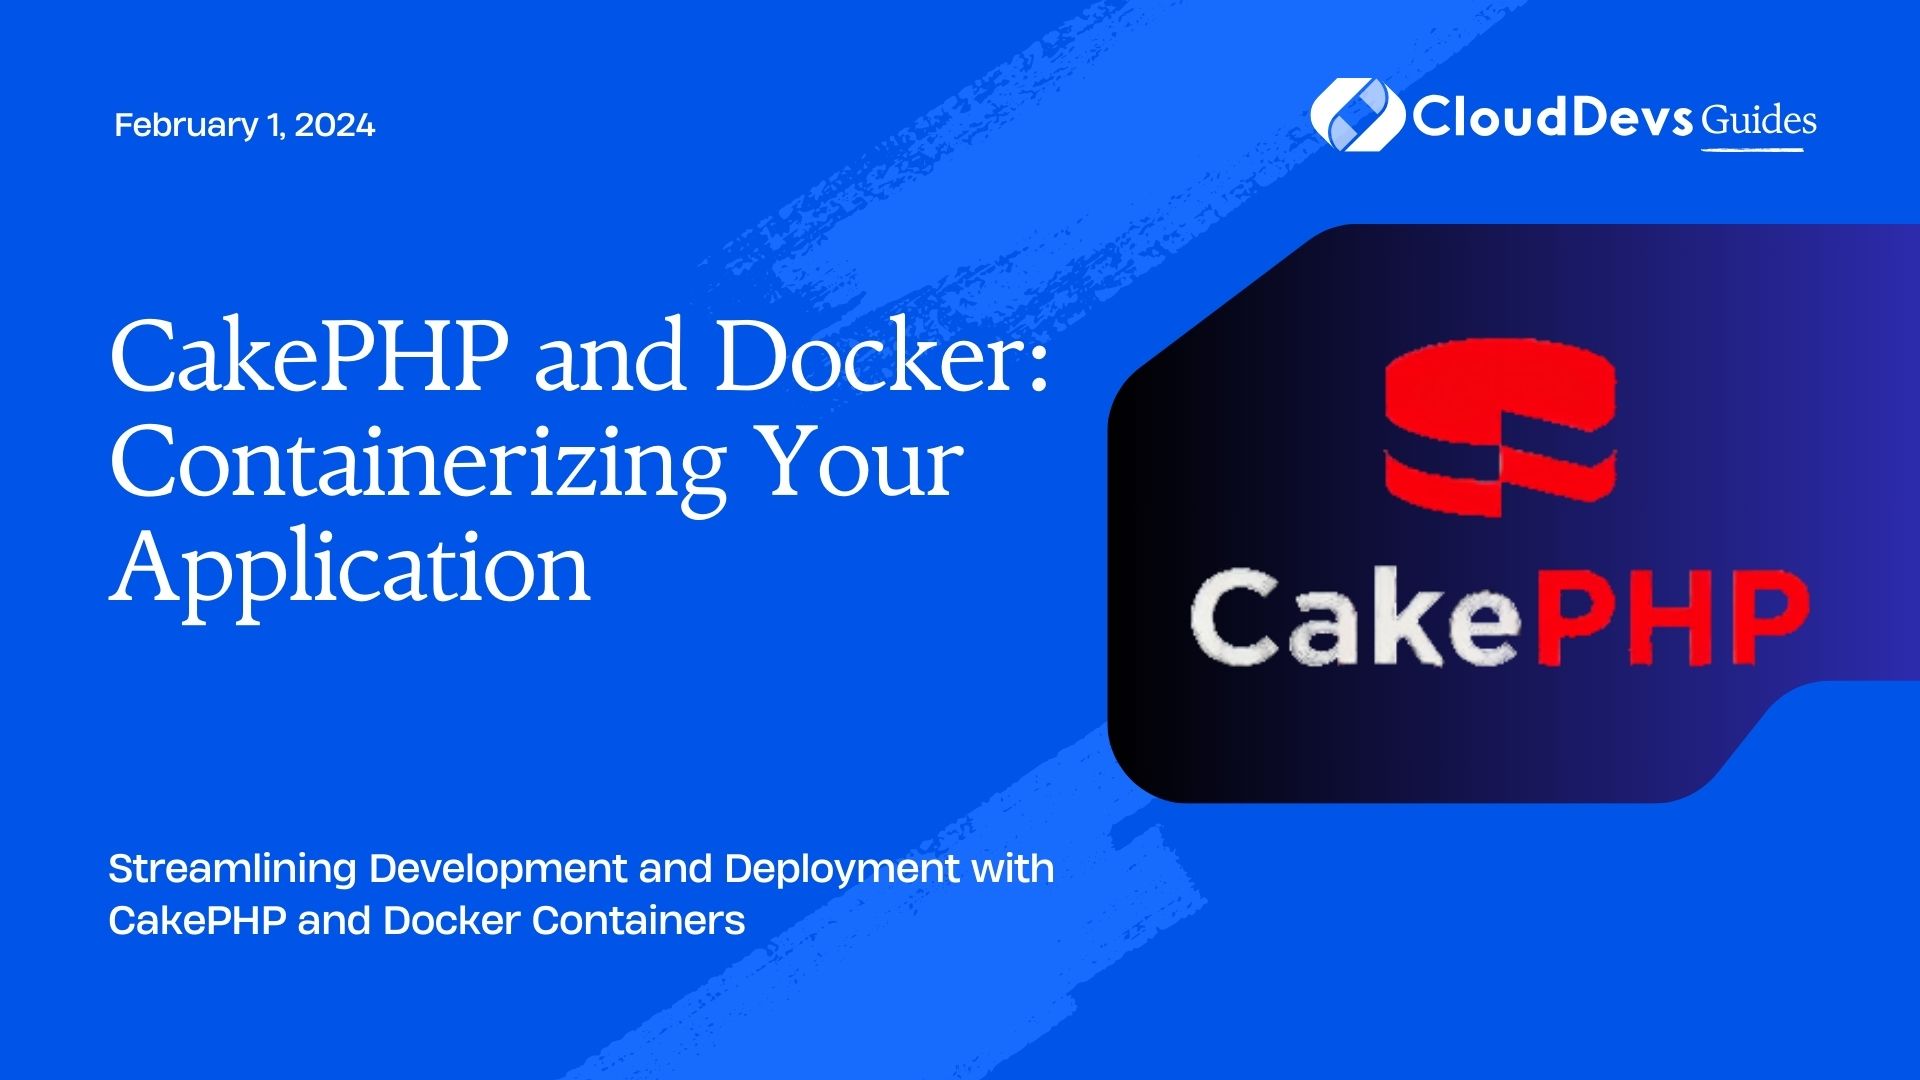 CakePHP and Docker: Containerizing Your Application